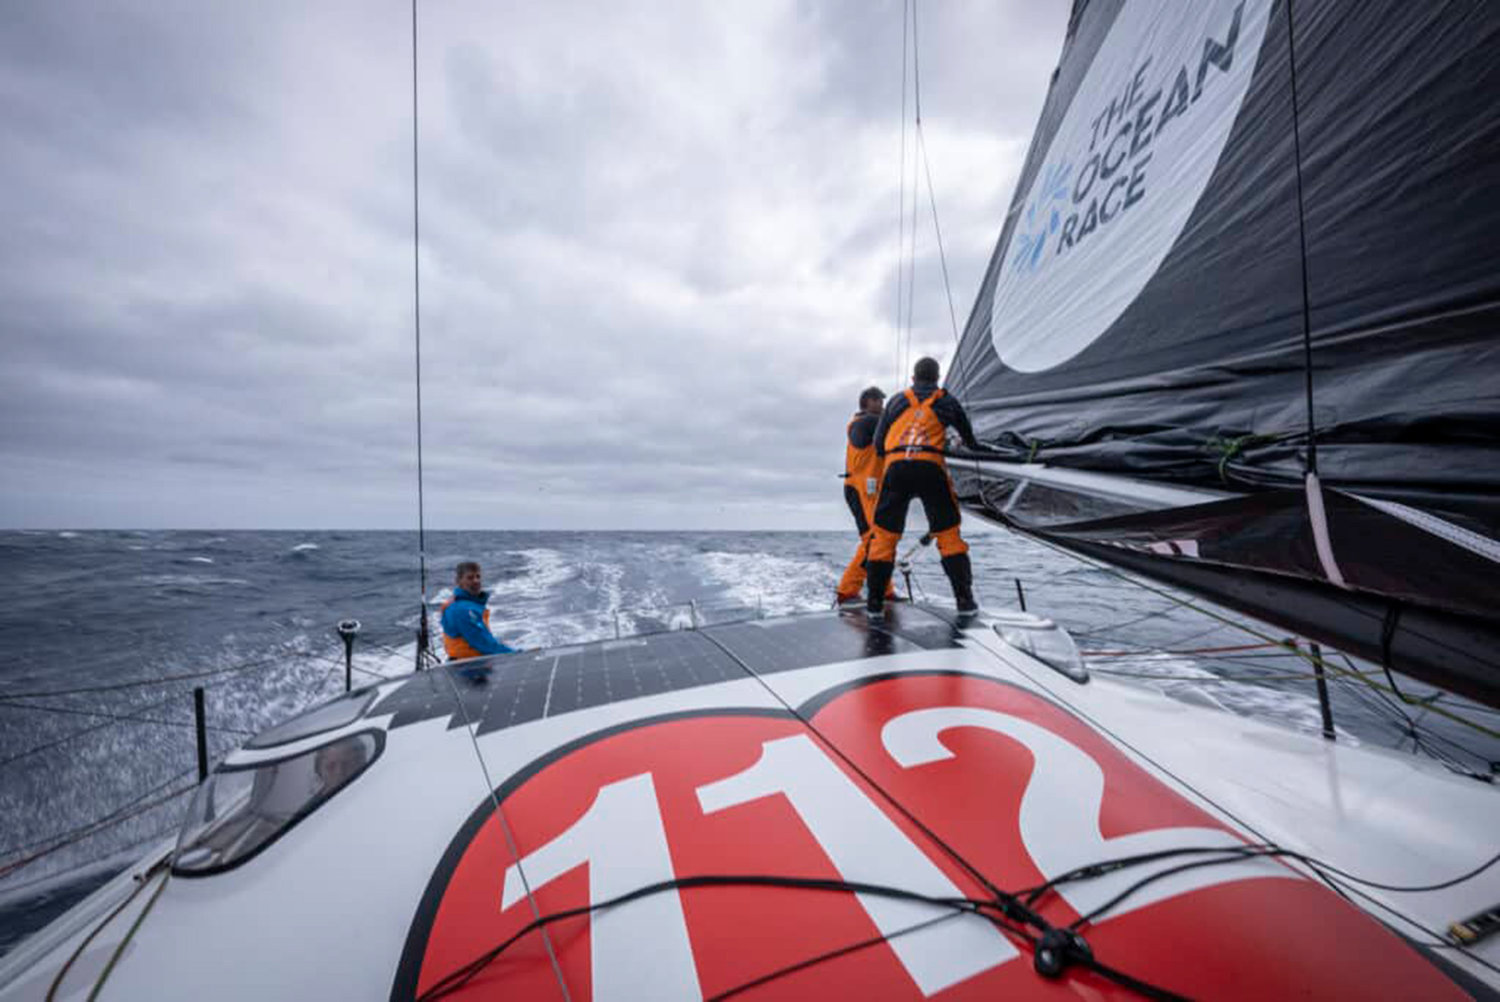 The Ocean Race 2022-23 - 05 March 2023, Leg 3 onboard 11th Hour Racing Team. Charlie Enright and Jack Bouttell clean up the reef ties as winds build, as Simon Fisher takes a look at the weather picture outside.